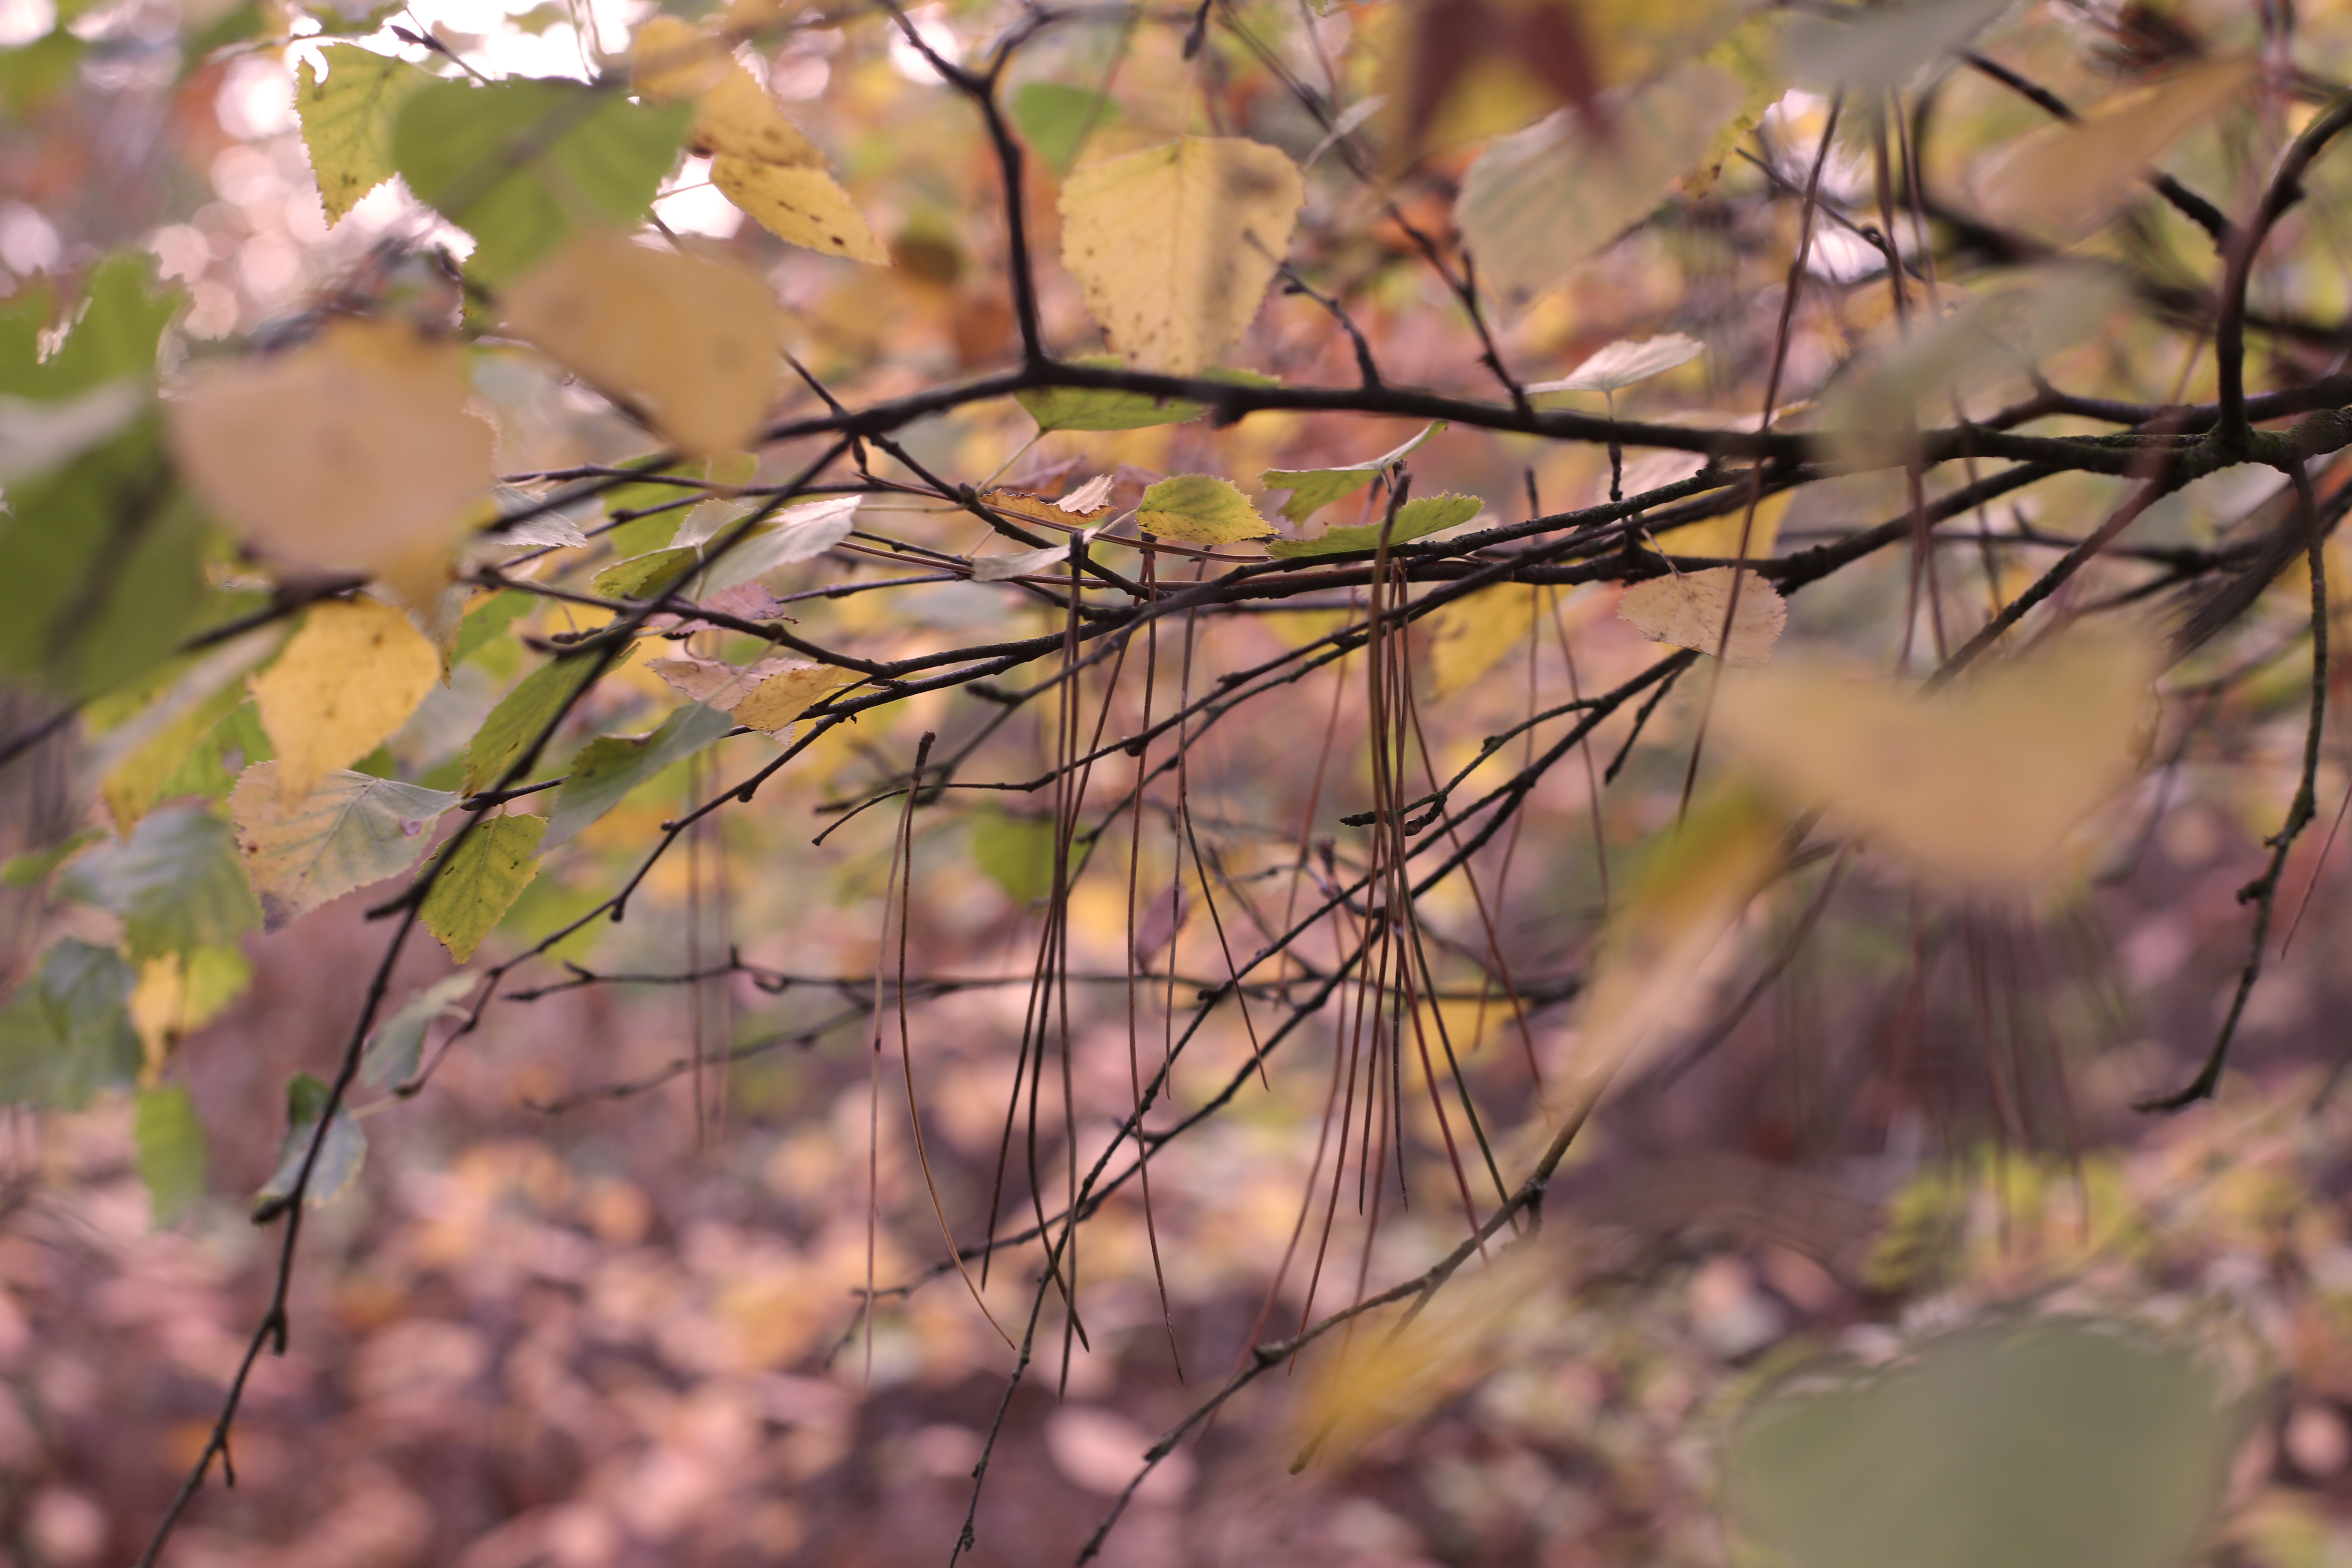 General 5760x3840 nature leaves forest spring closeup twigs